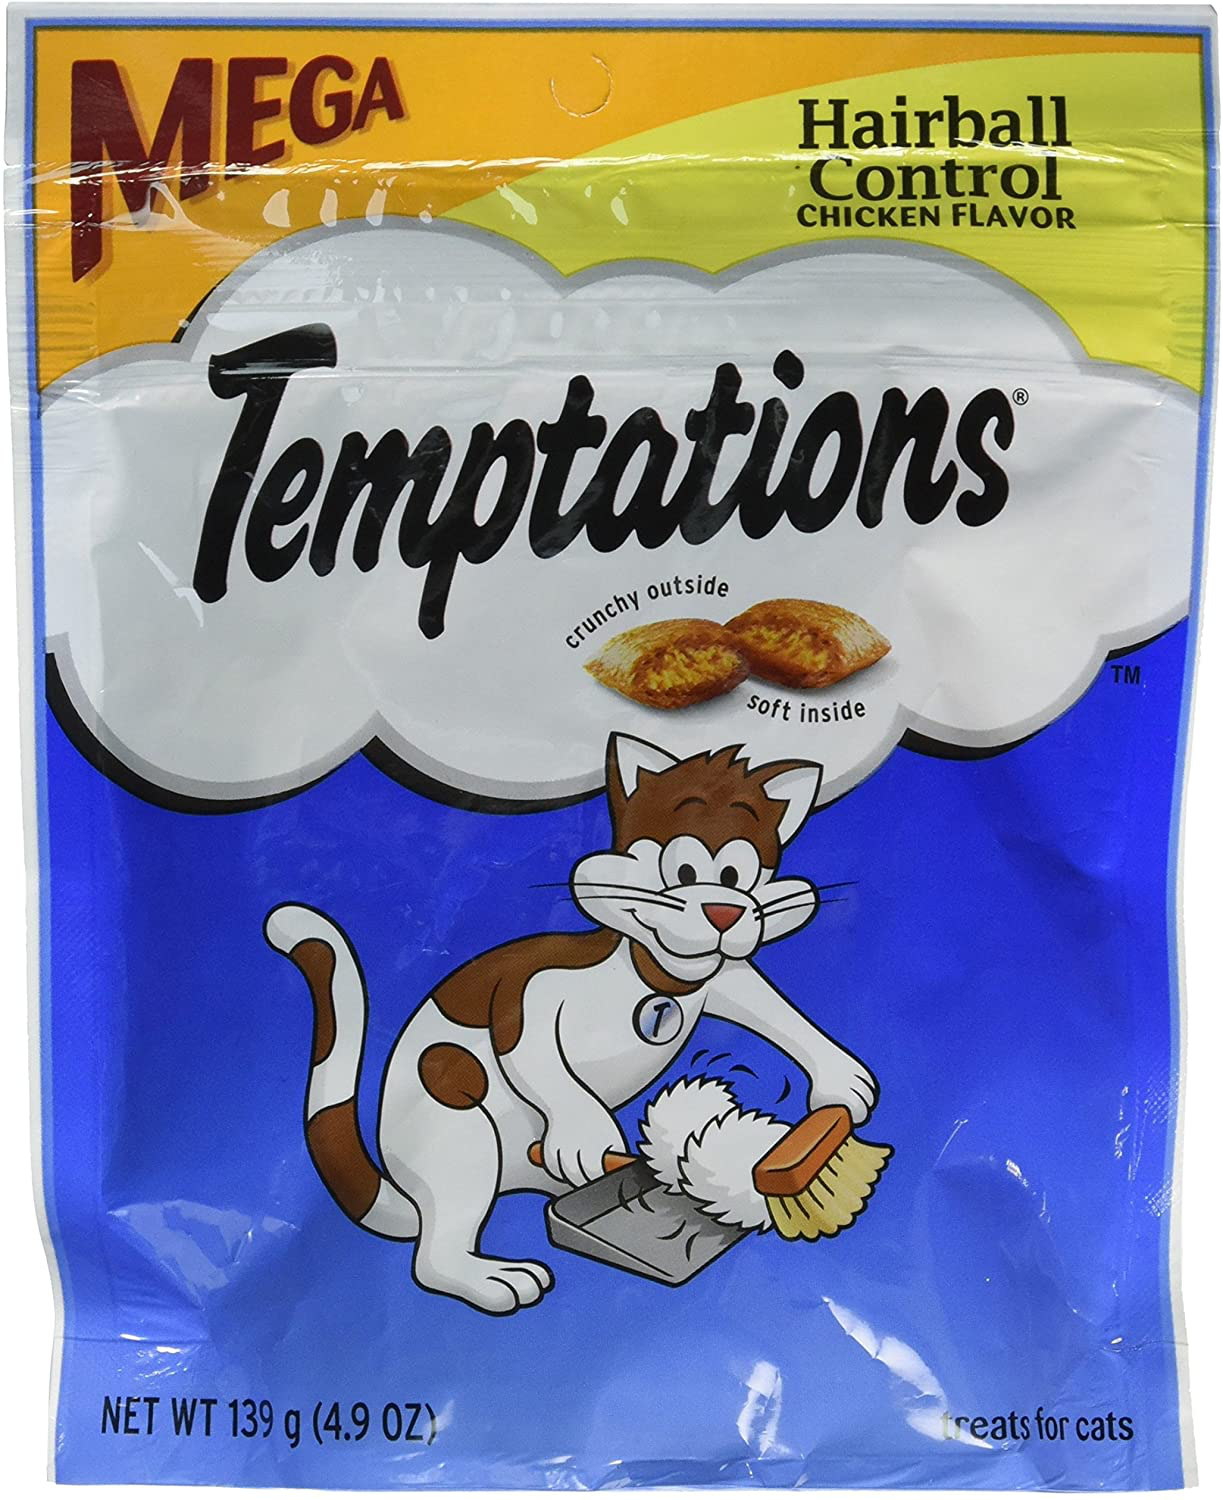 Whiskas Temptations Hairball Control Chicken Flavor Cat Treats 4.9 oz by Mars 3-Pack Bundle 